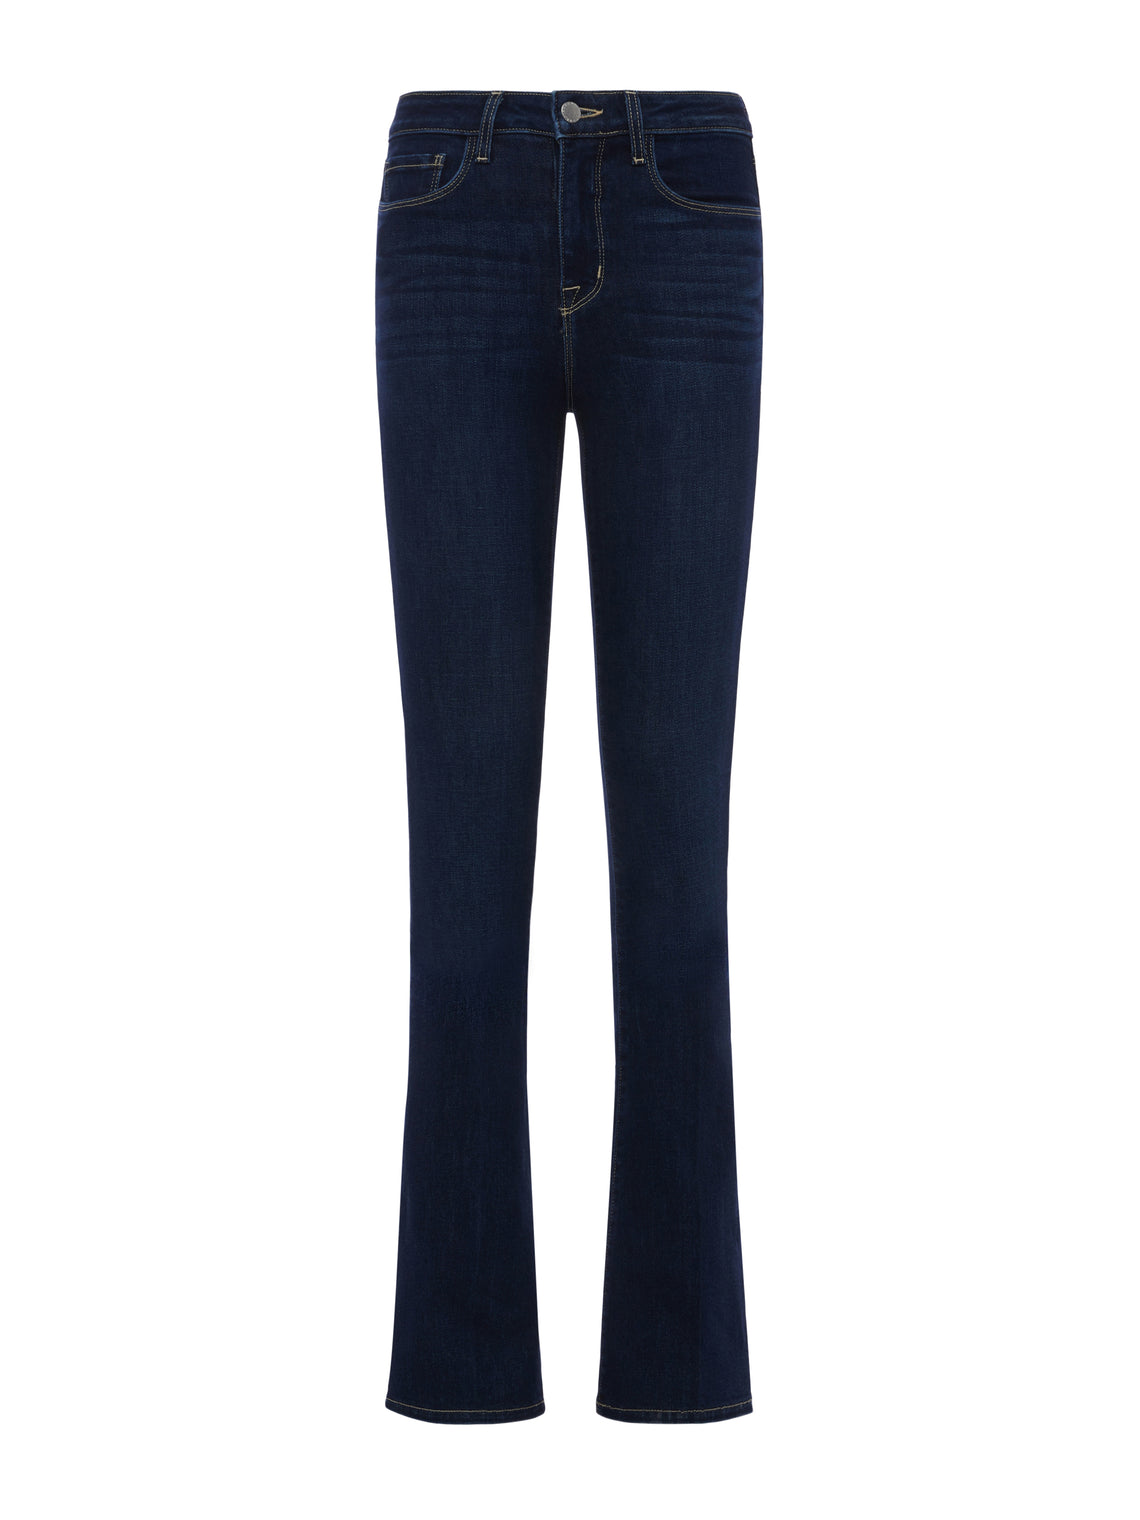 L'AGENCE Selma High-Rise Bootcut Jean In Barstow